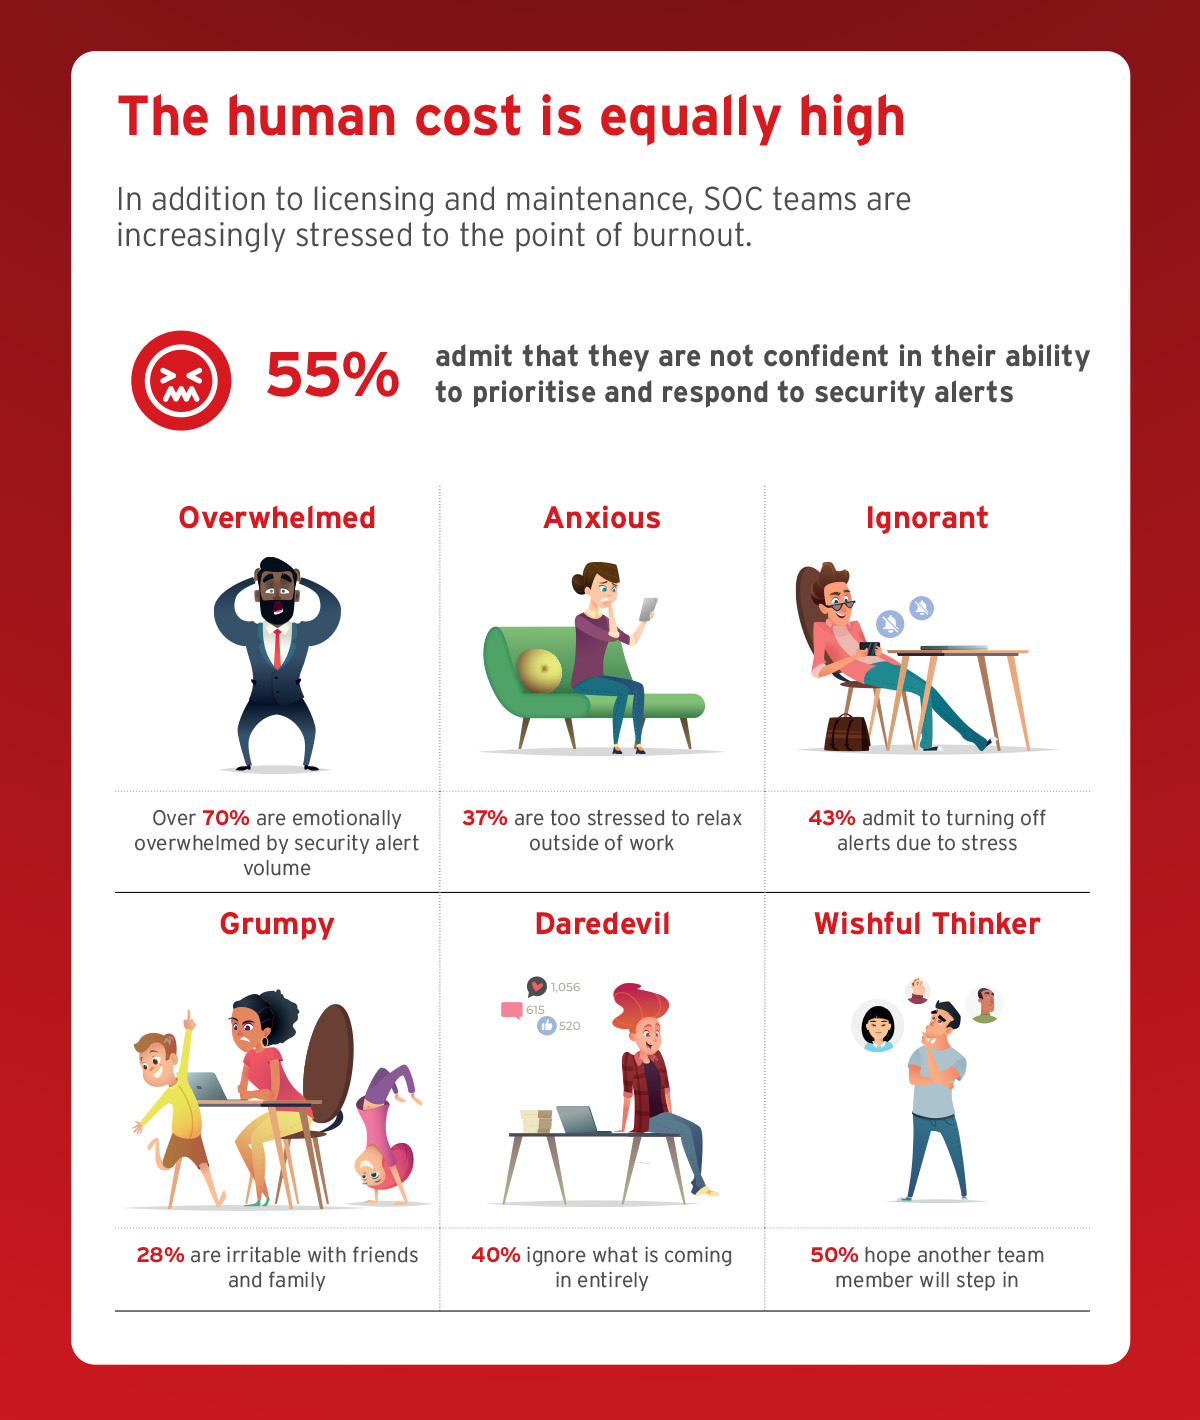 The human cost is equally high infographic